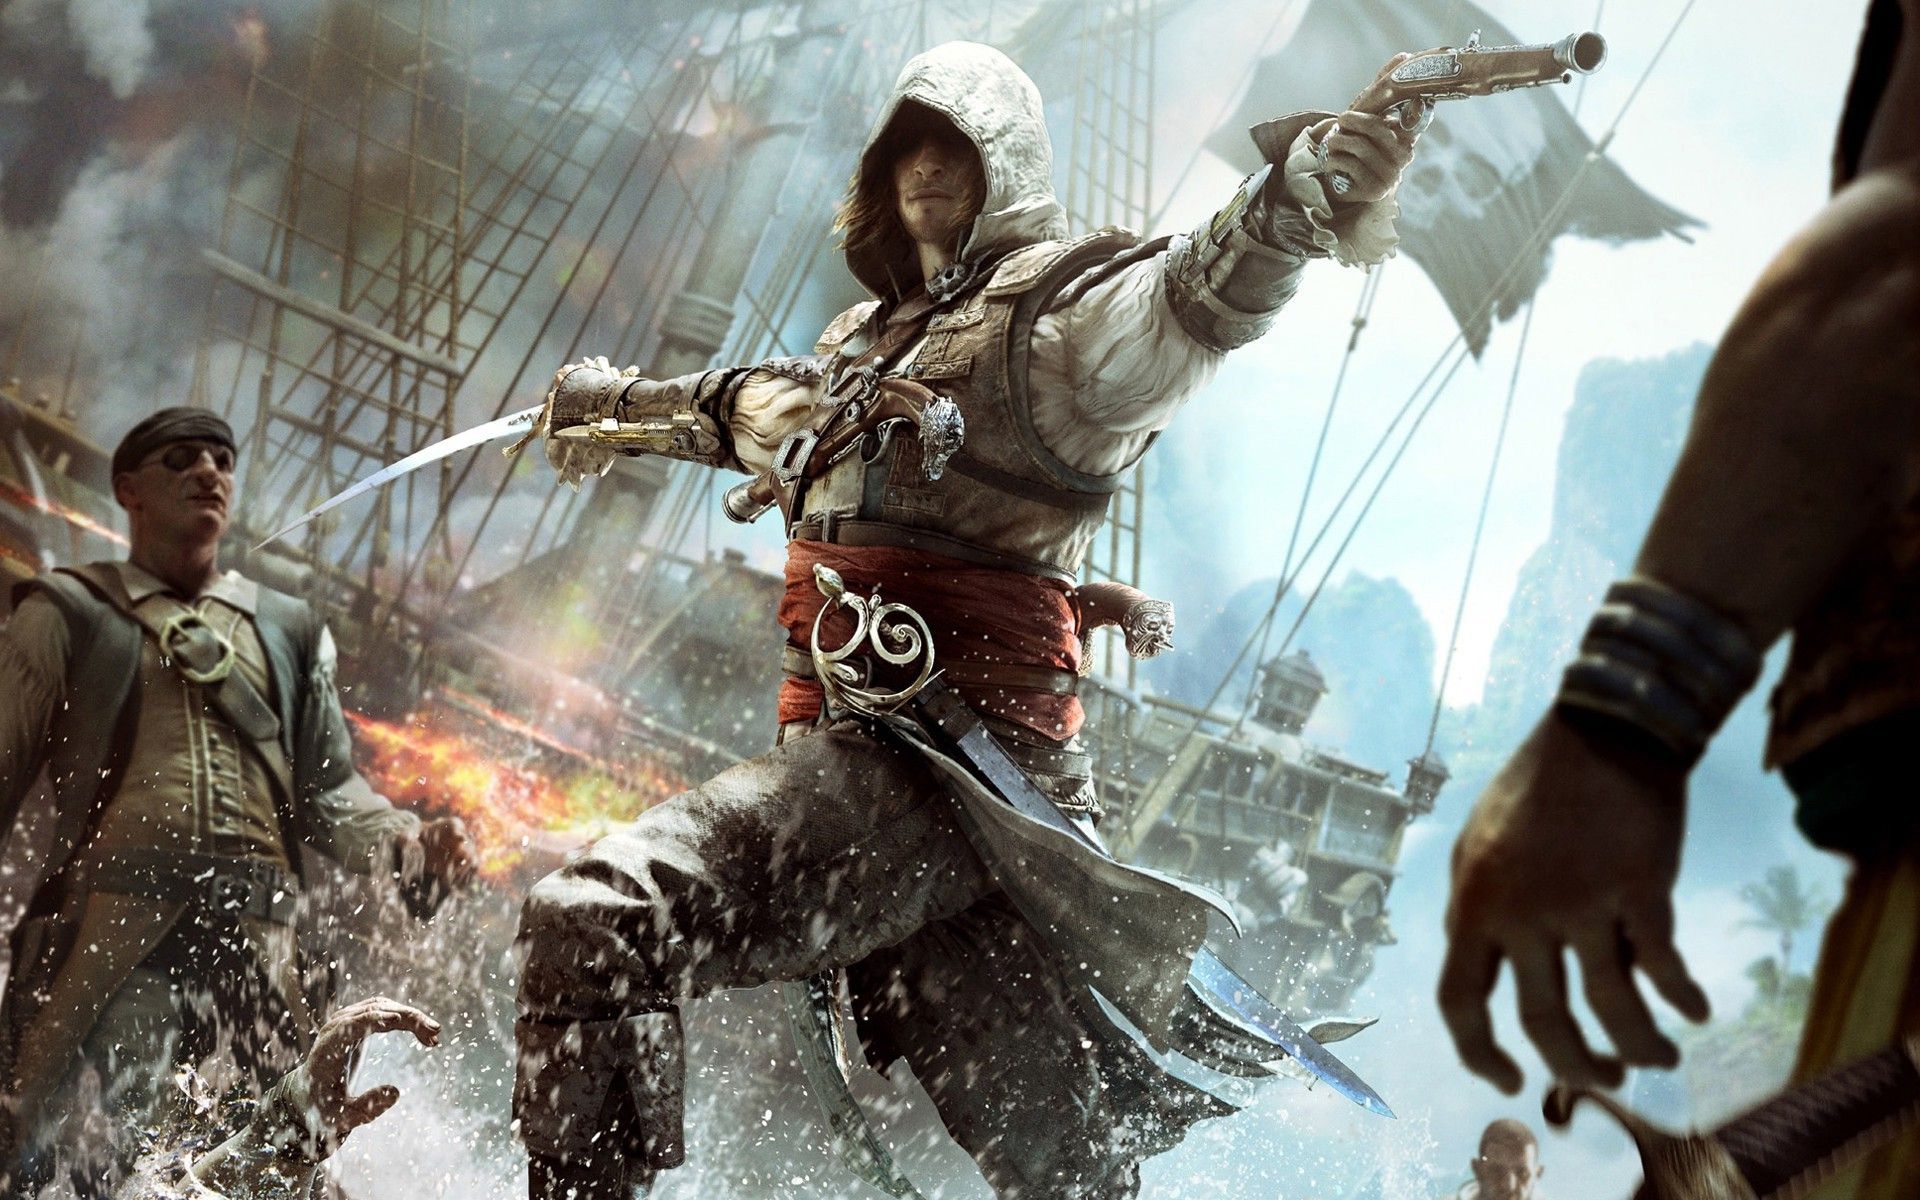 assassins creed black flag wallpapers Wallpapers